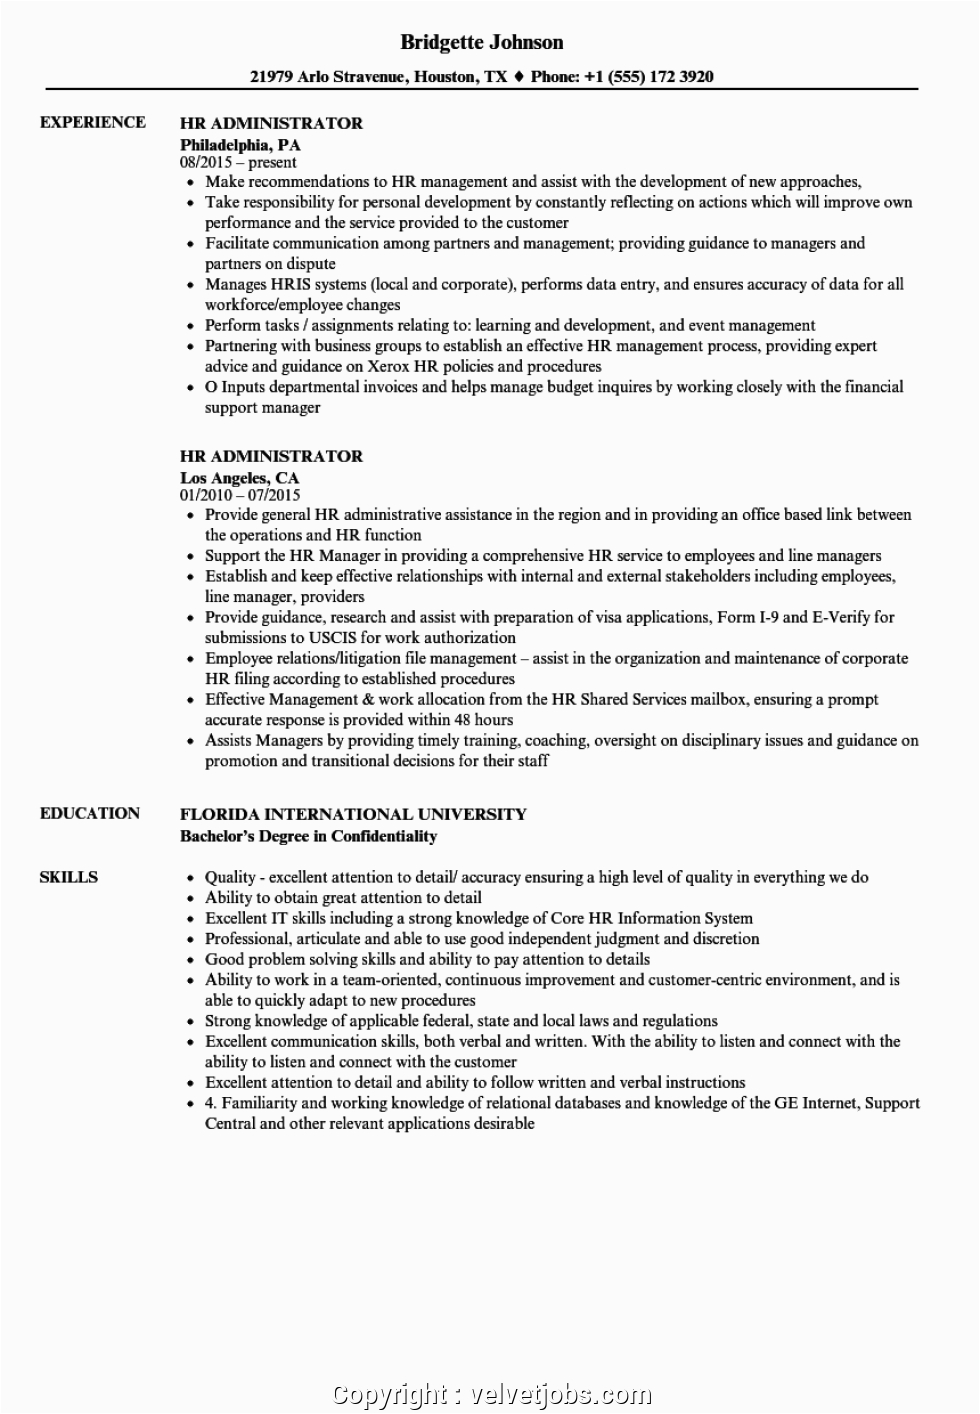 Hr and Admin Executive Resume Sample Professional Hr Administrator Cv Sample Hr Administrator